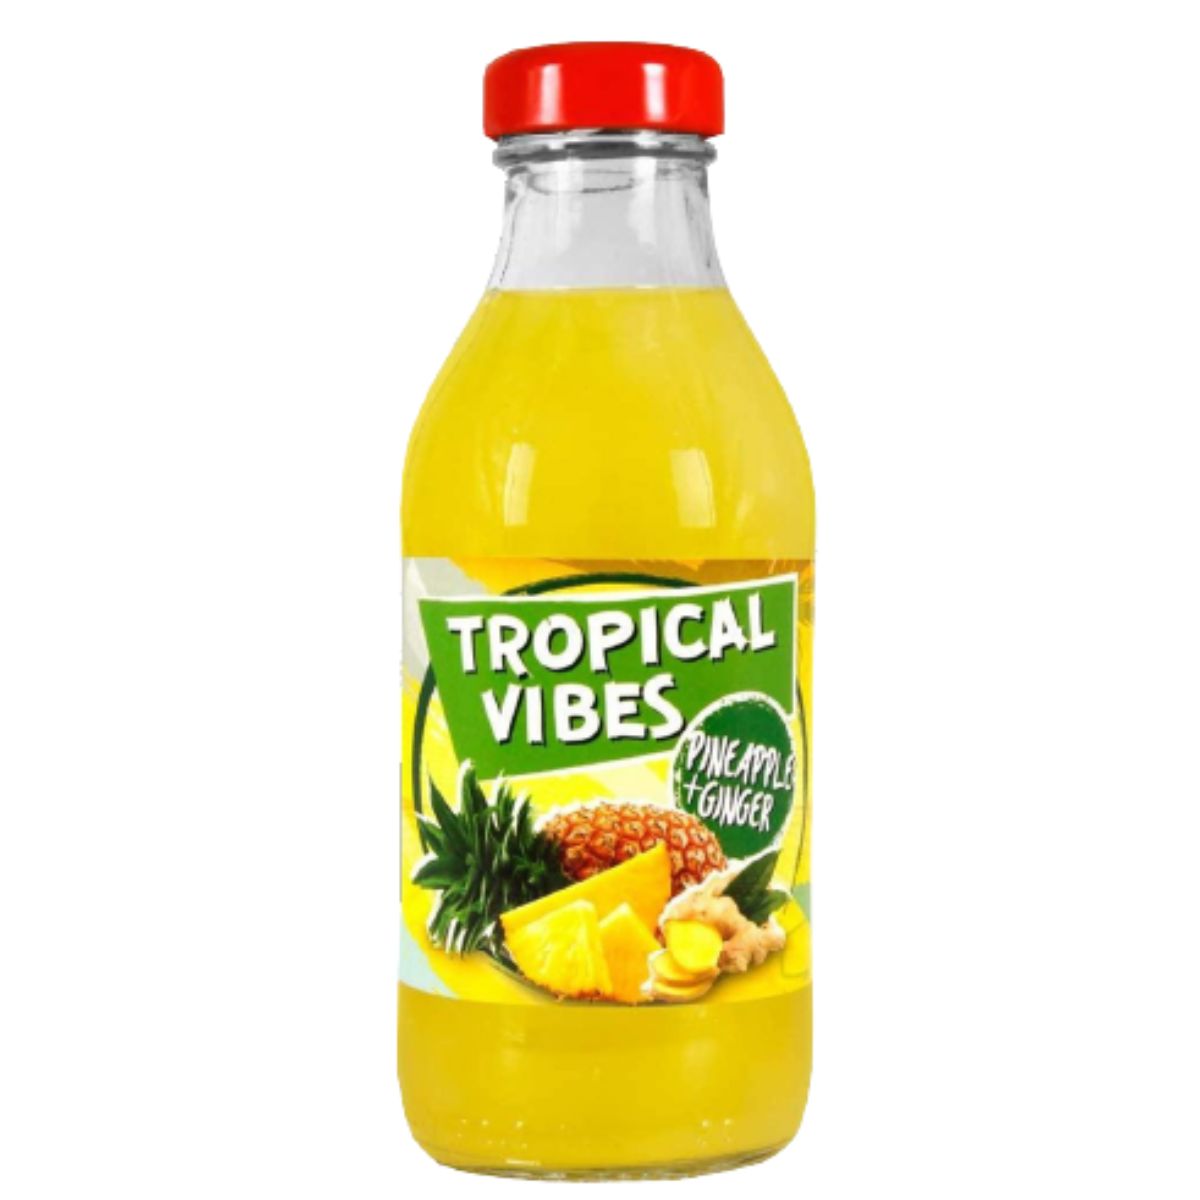 A bottle of Tropical Vibes - Pineapple & Ginger Drink - 300ml on a white background.